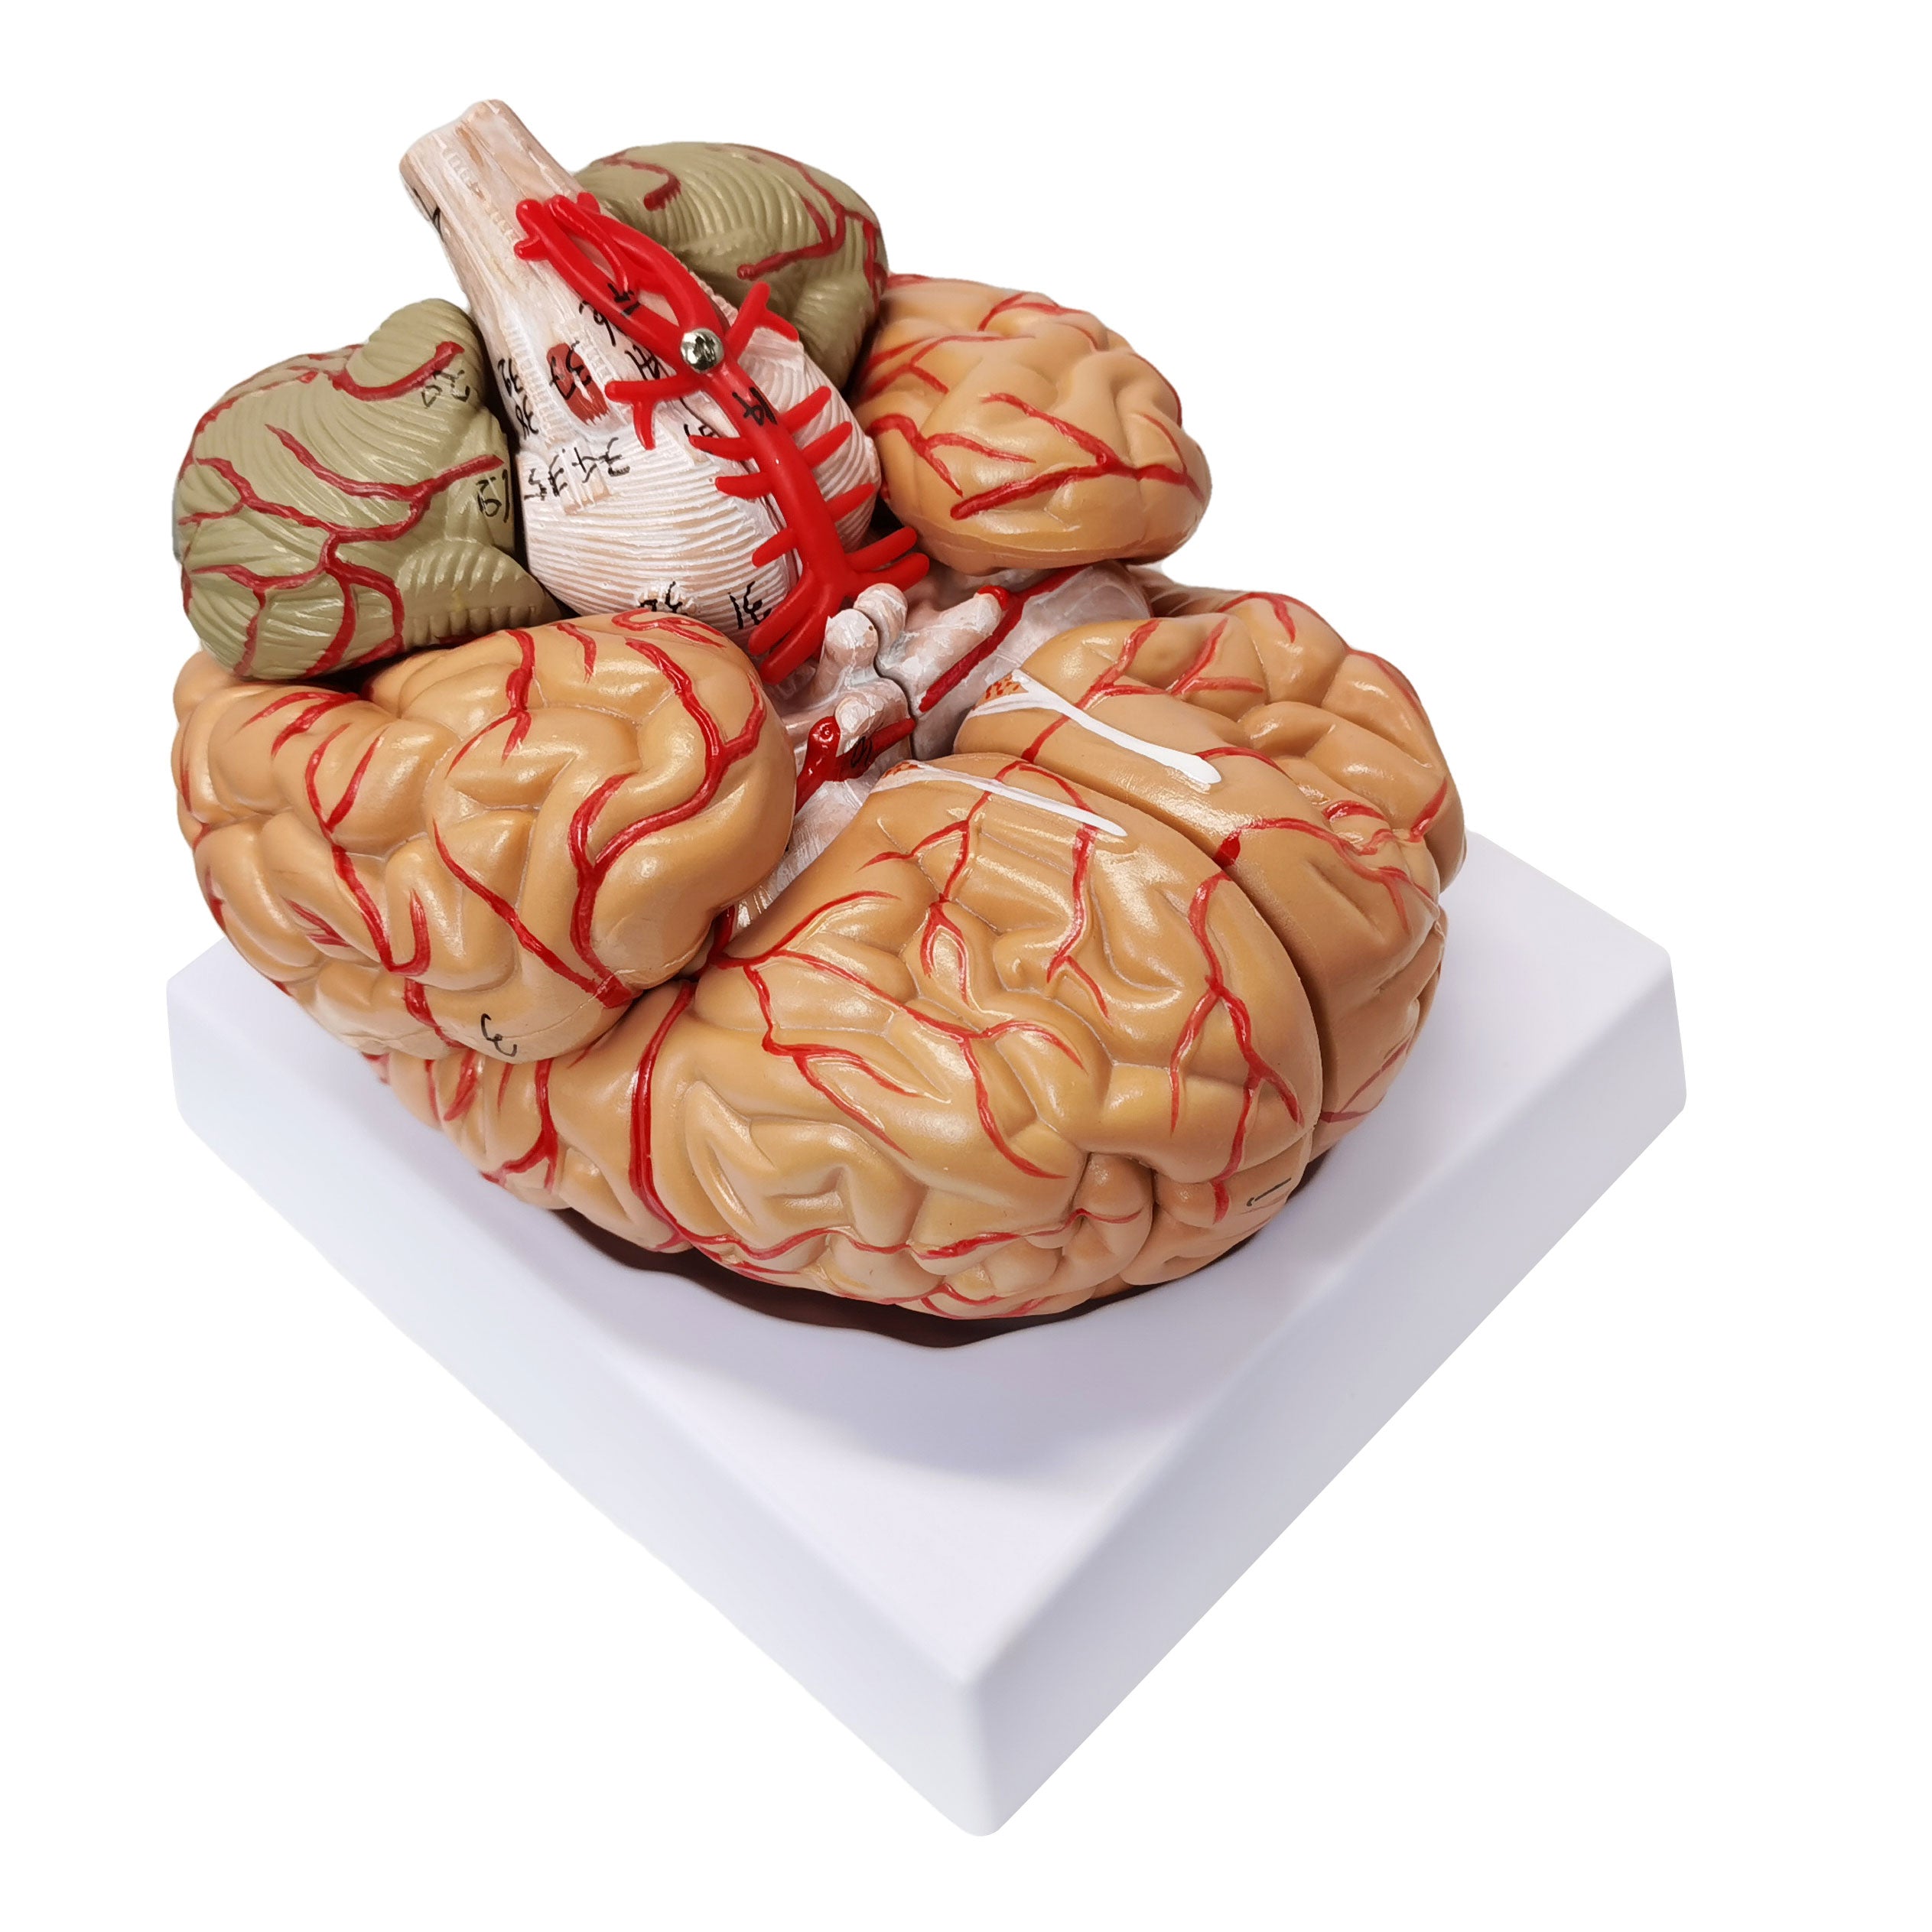 Evotech Scientific Deluxe Human Brain with Arteries, Life Size, 9 Partts